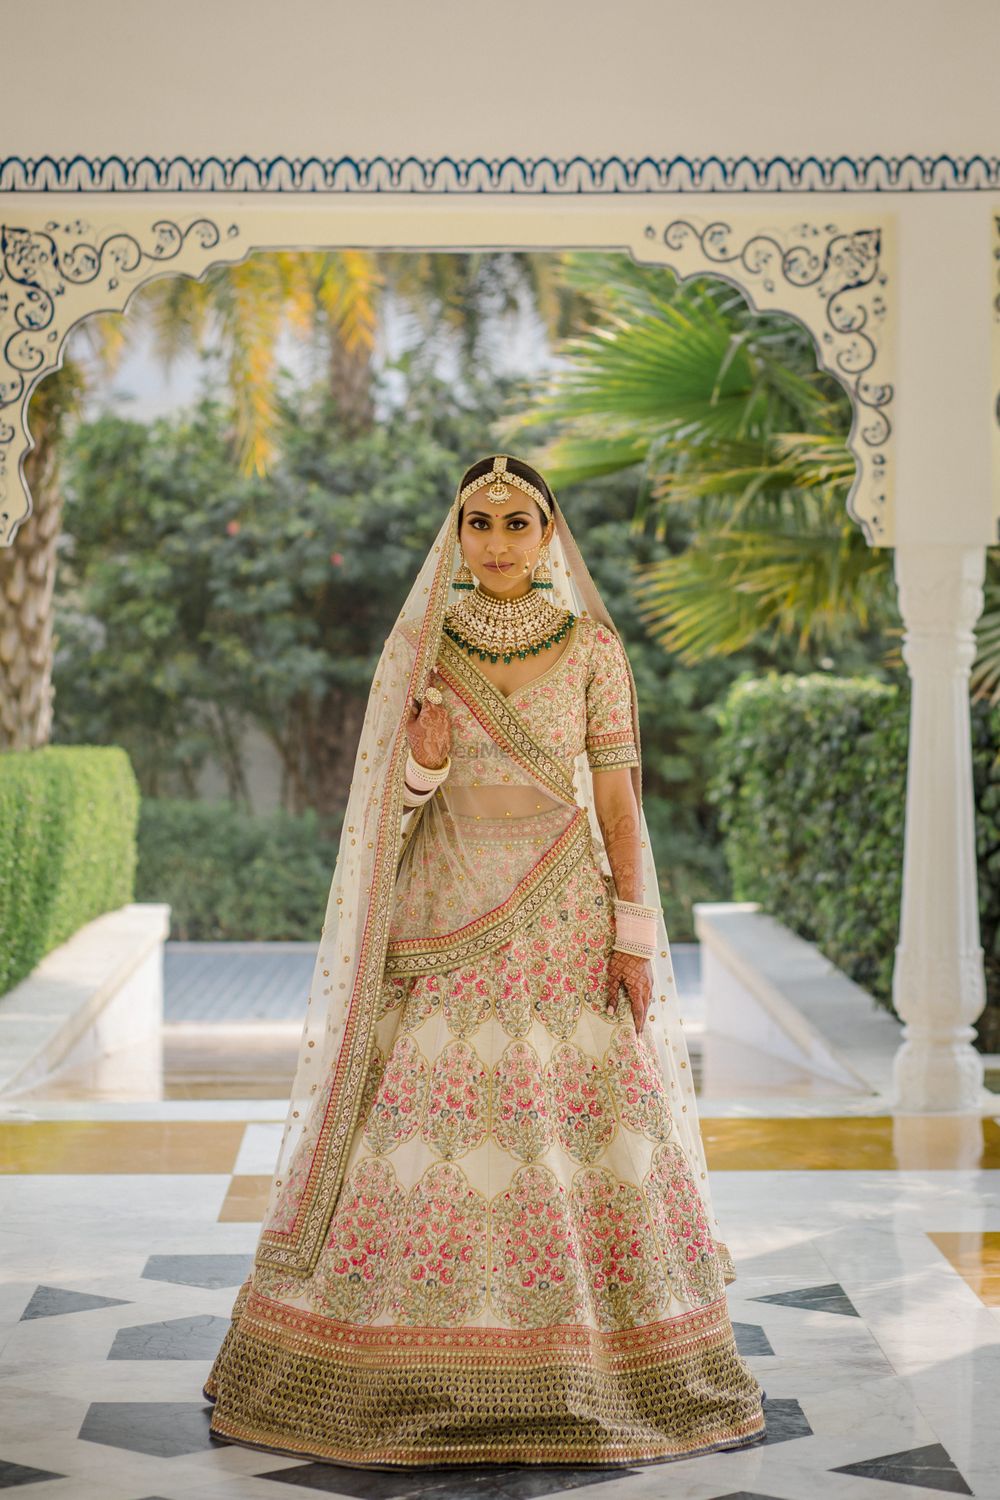 Photo of Bride dressed in an ivory lehenga on her wedding day.